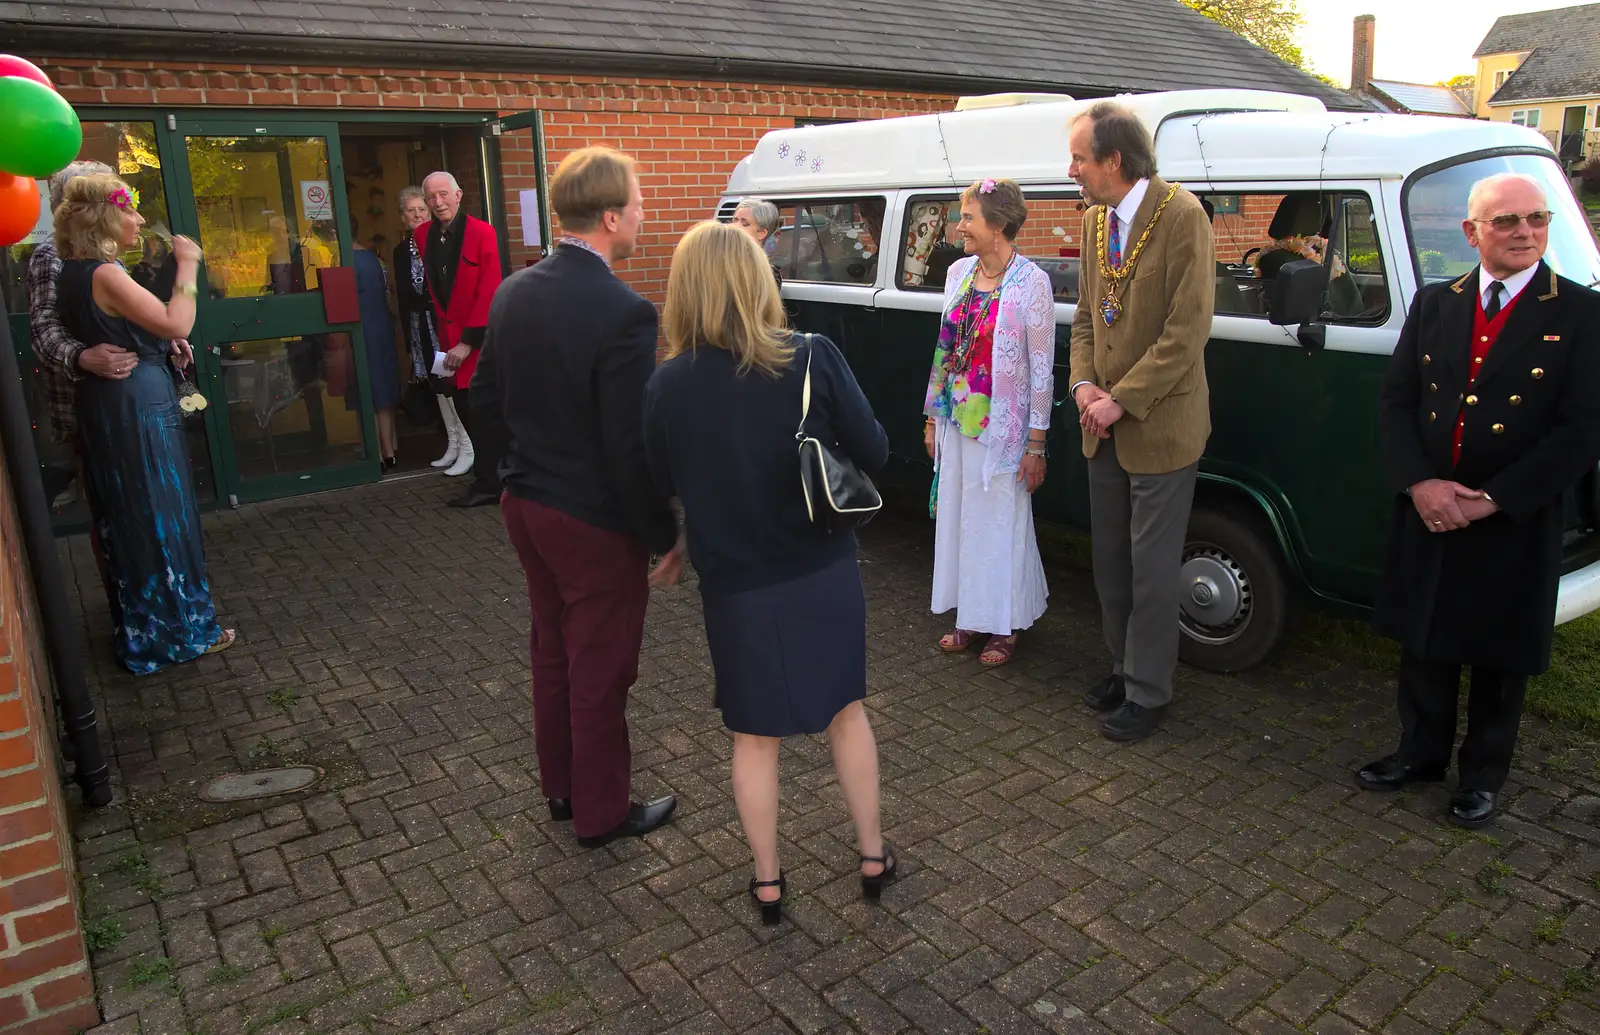 Merlin in front of his camper van, from The BBs at the Mayor's Charity Ball, Town Moors, Eye, Suffolk - 4th May 2013